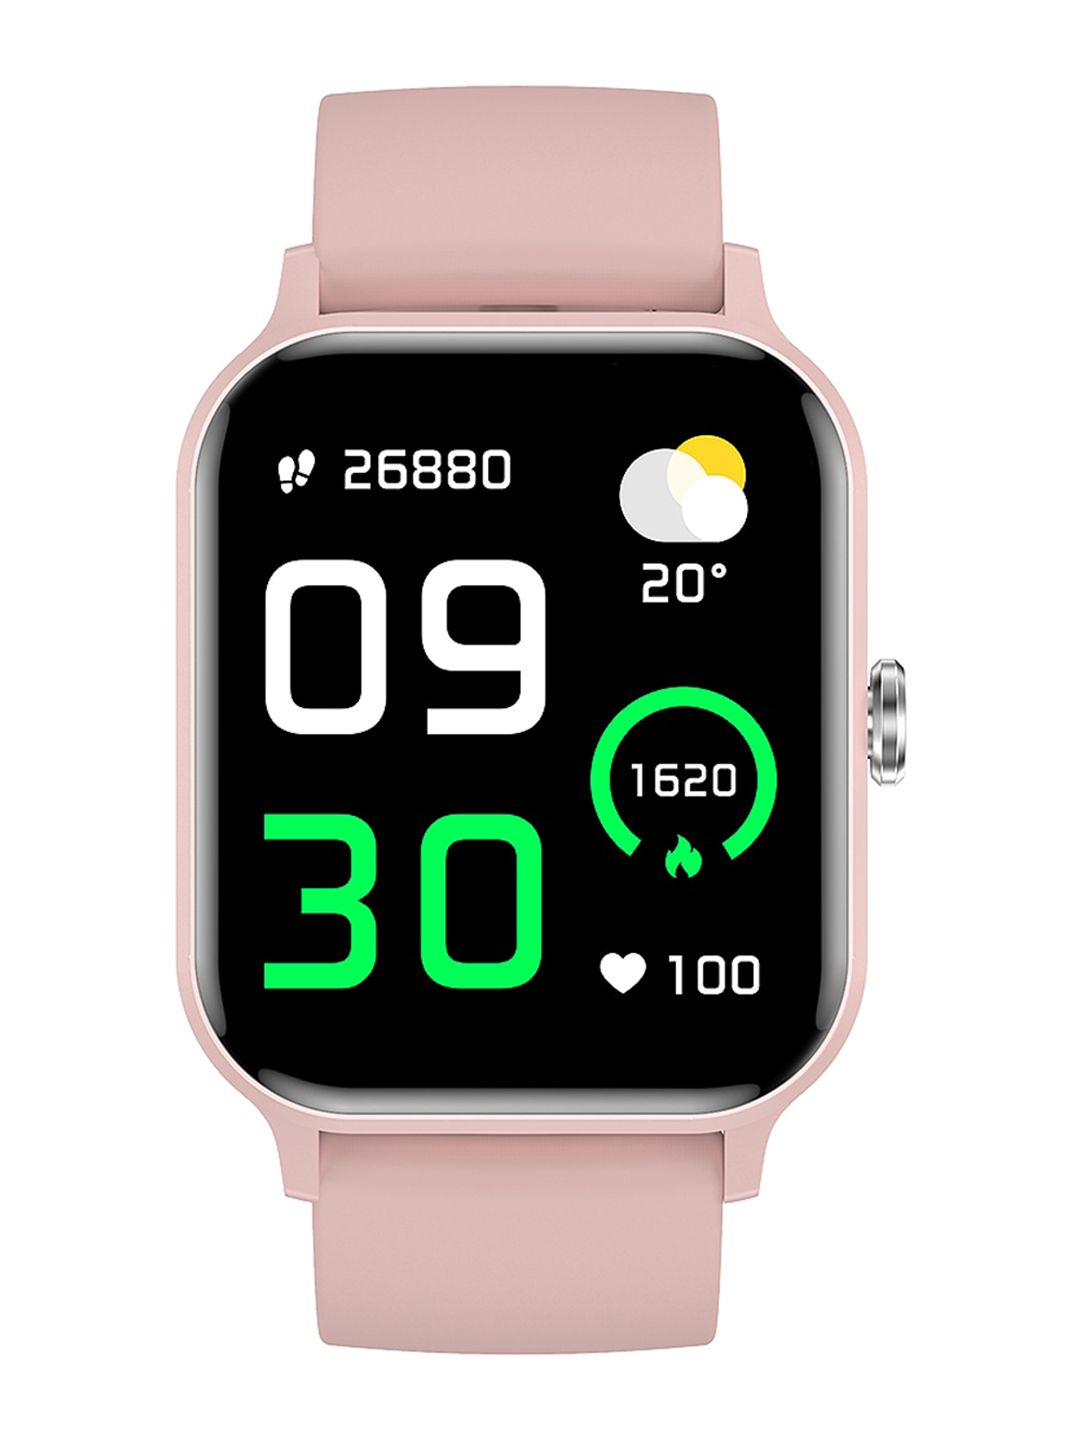 Buy MINIX Newly Launched Largest Screen Size Denver Smartwatch